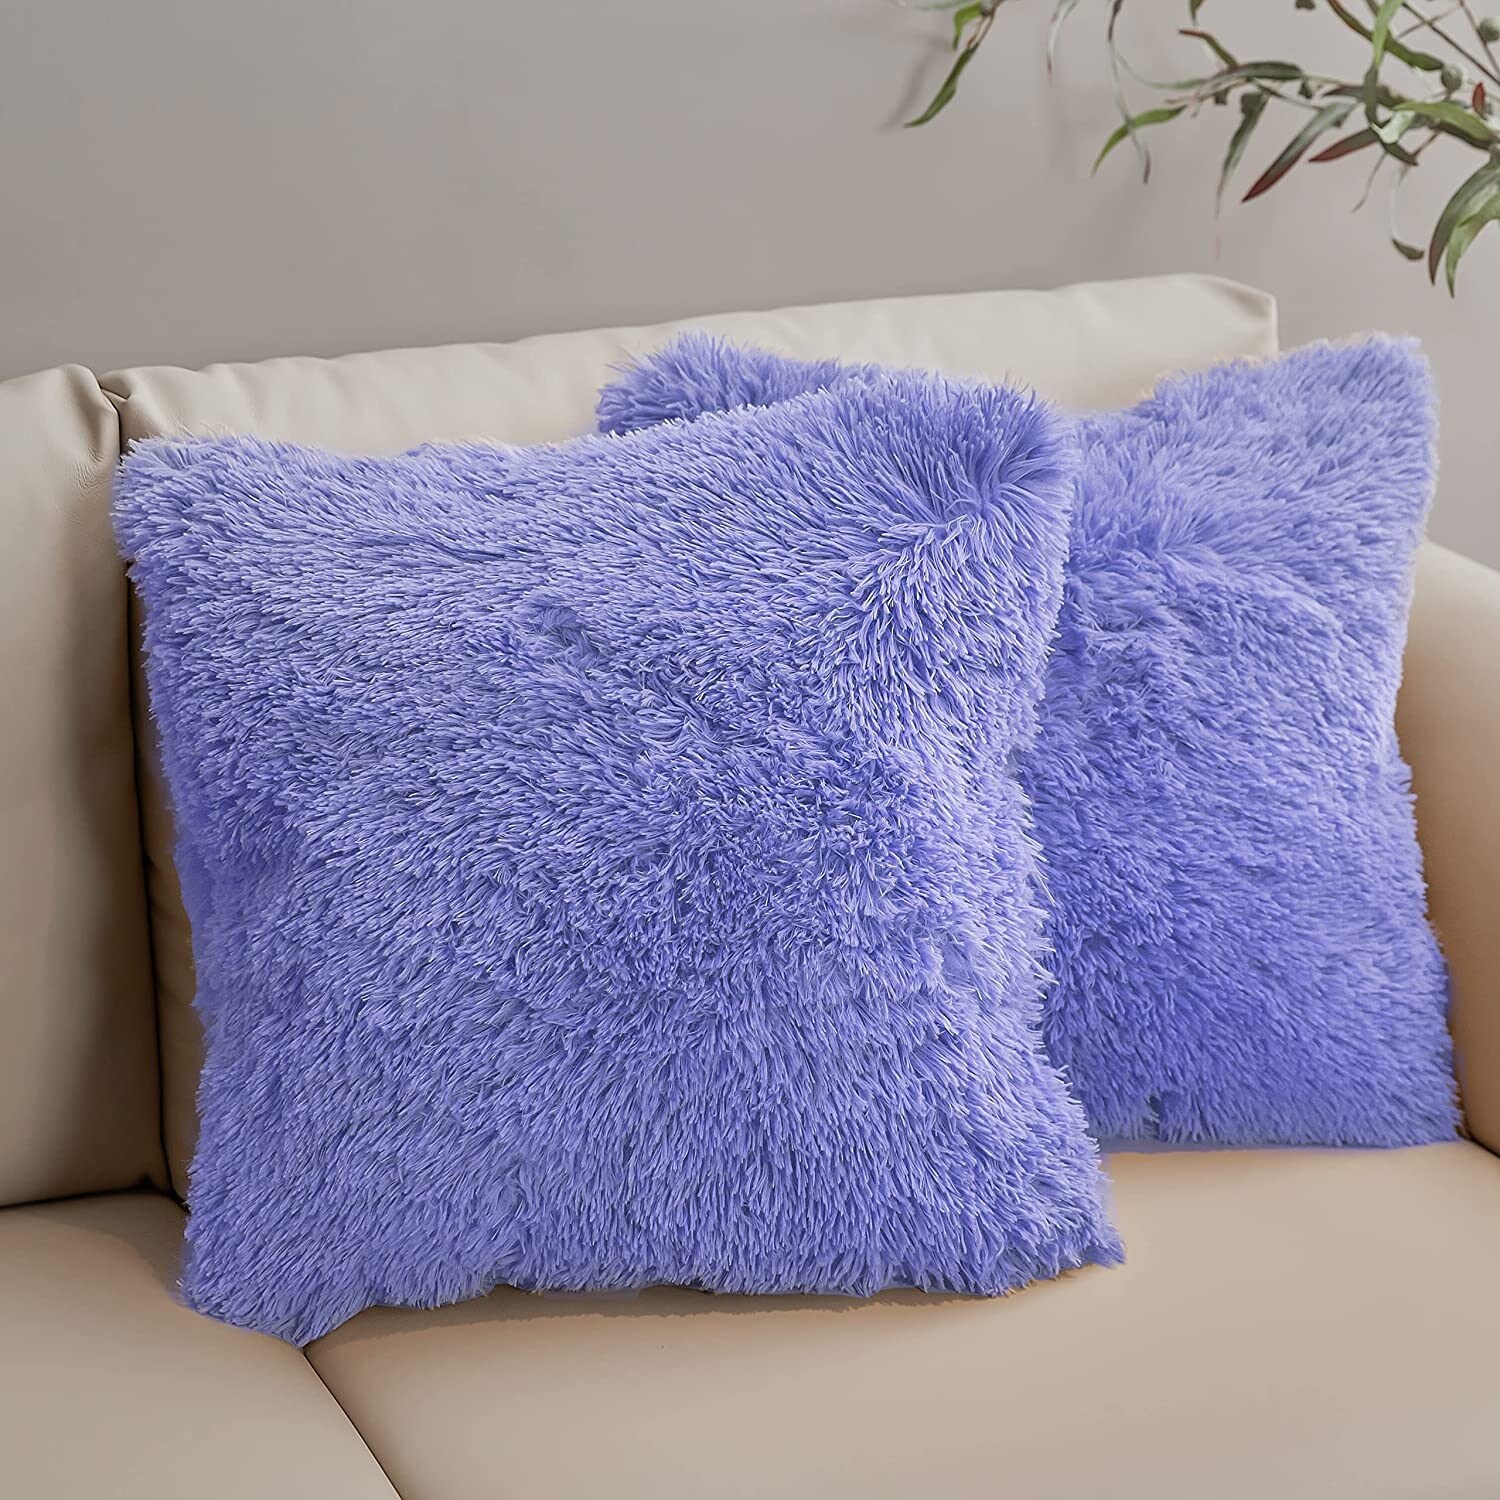  Cheer Collection Set of 2 Shaggy Long Hair Throw